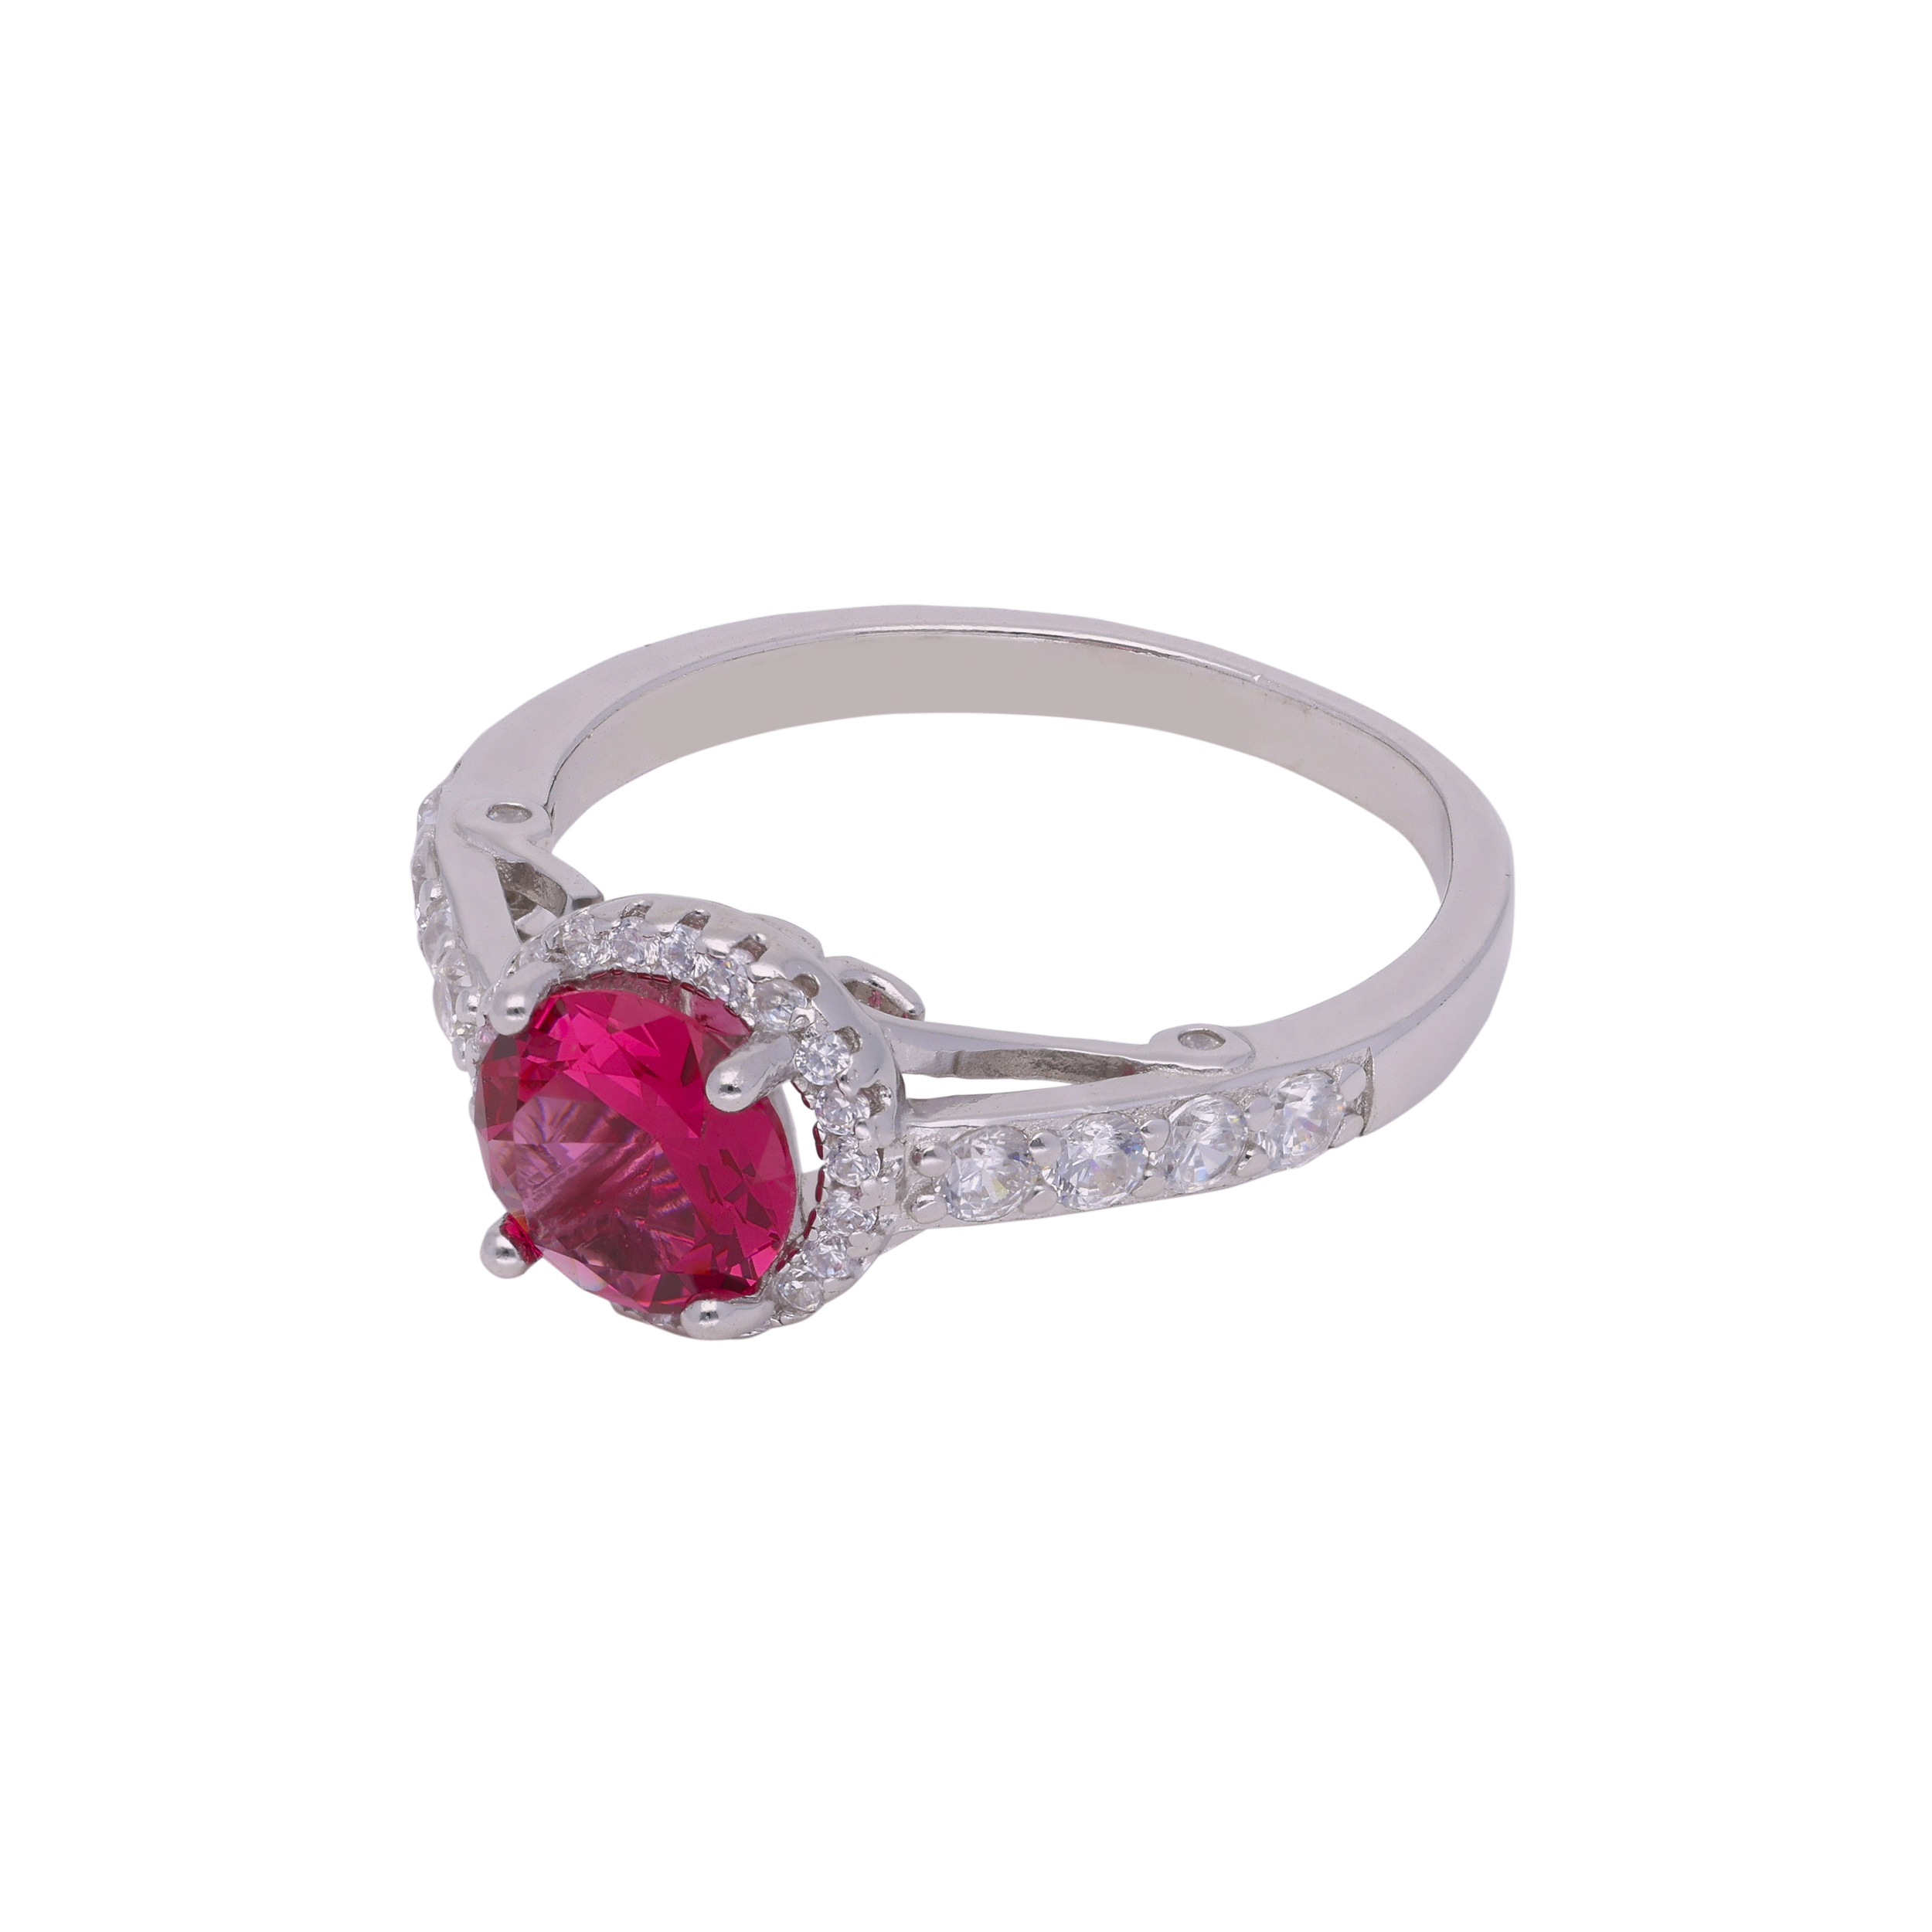 Radiant Red: Sterling Silver Solitaire Ring | SKU : 0019890852